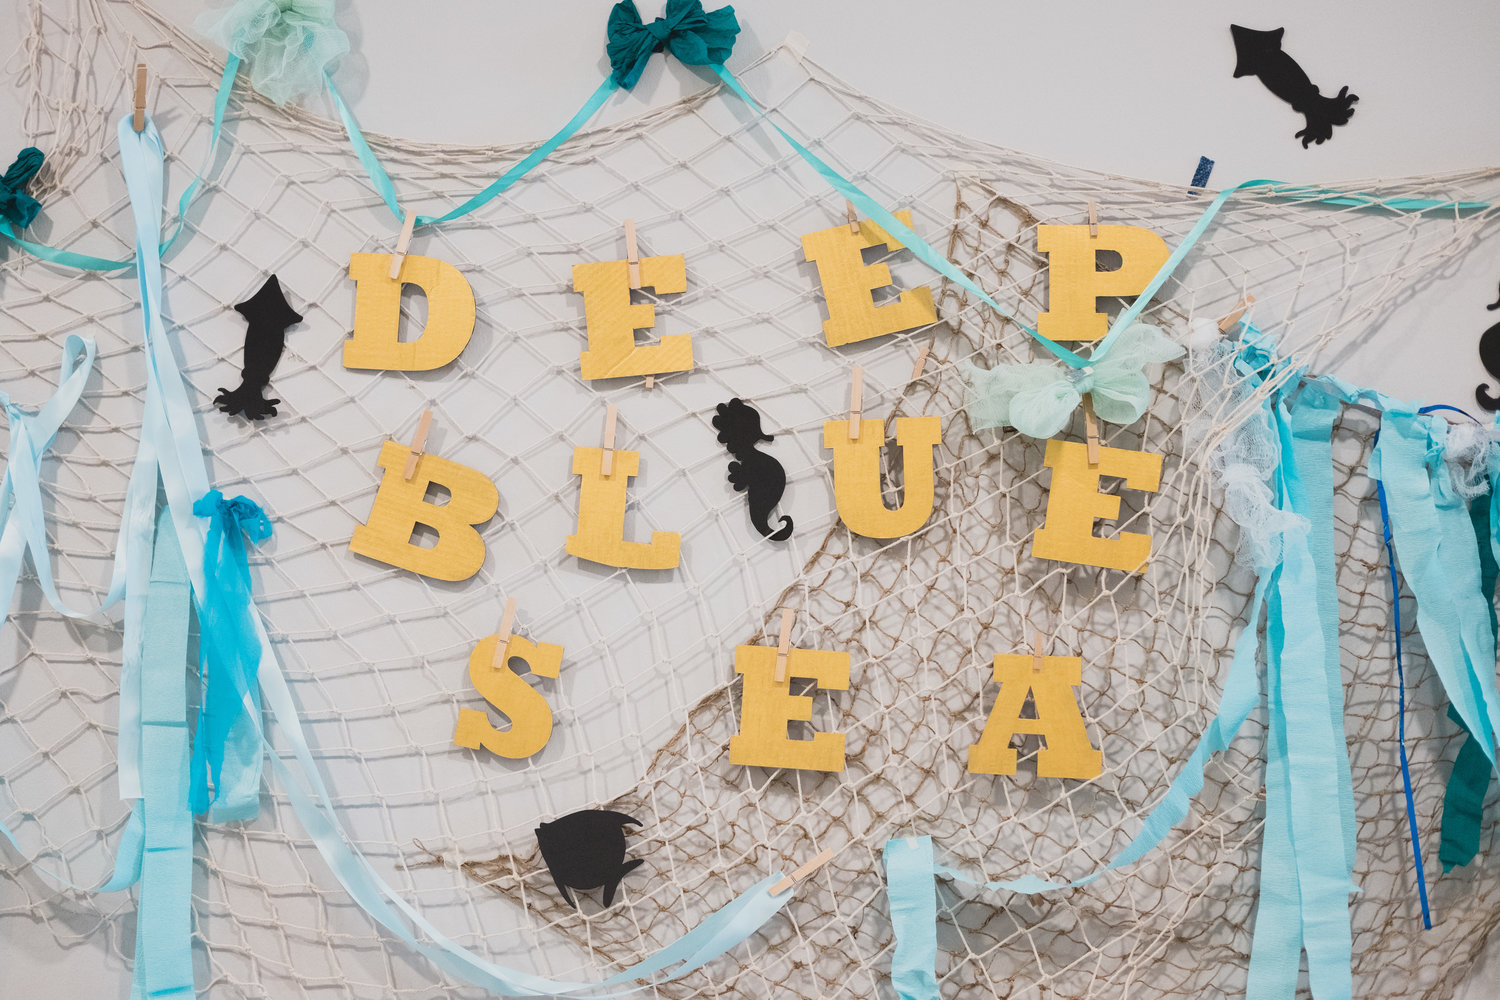 Backdrop and artwork for the Deep Blue Sea performance space.